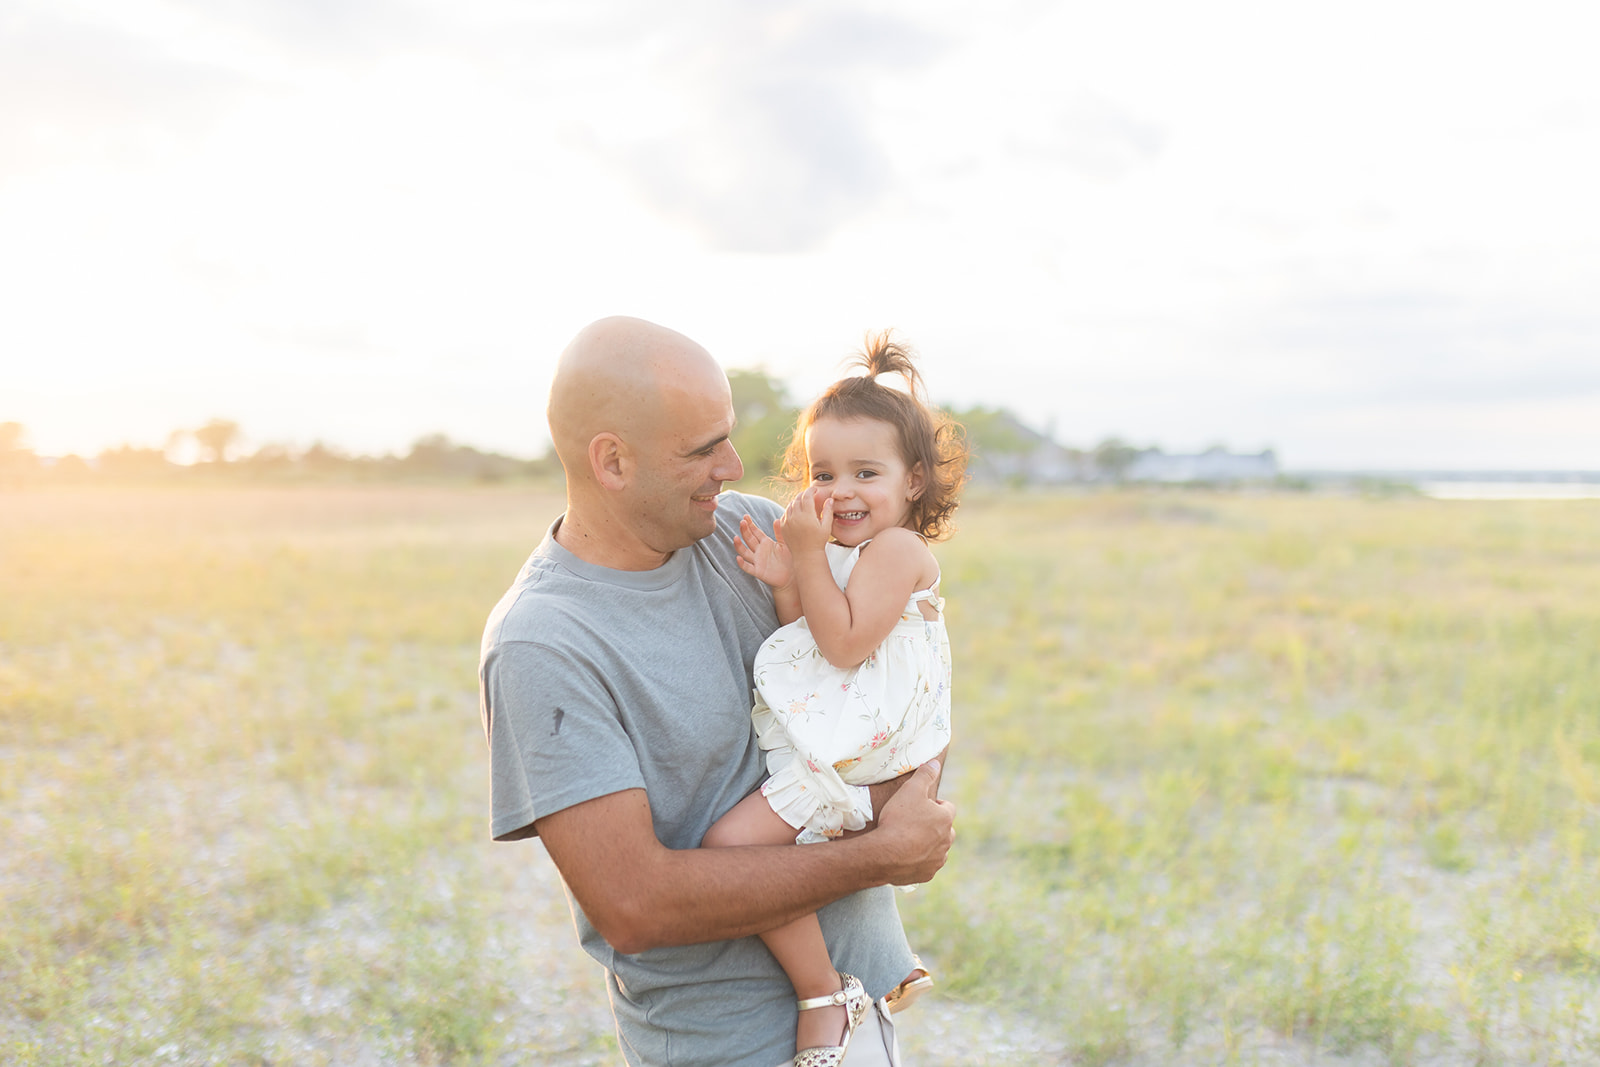 A father in a grey shirt smiles and plays with his toddler daughter on his hip on a beach at sunset